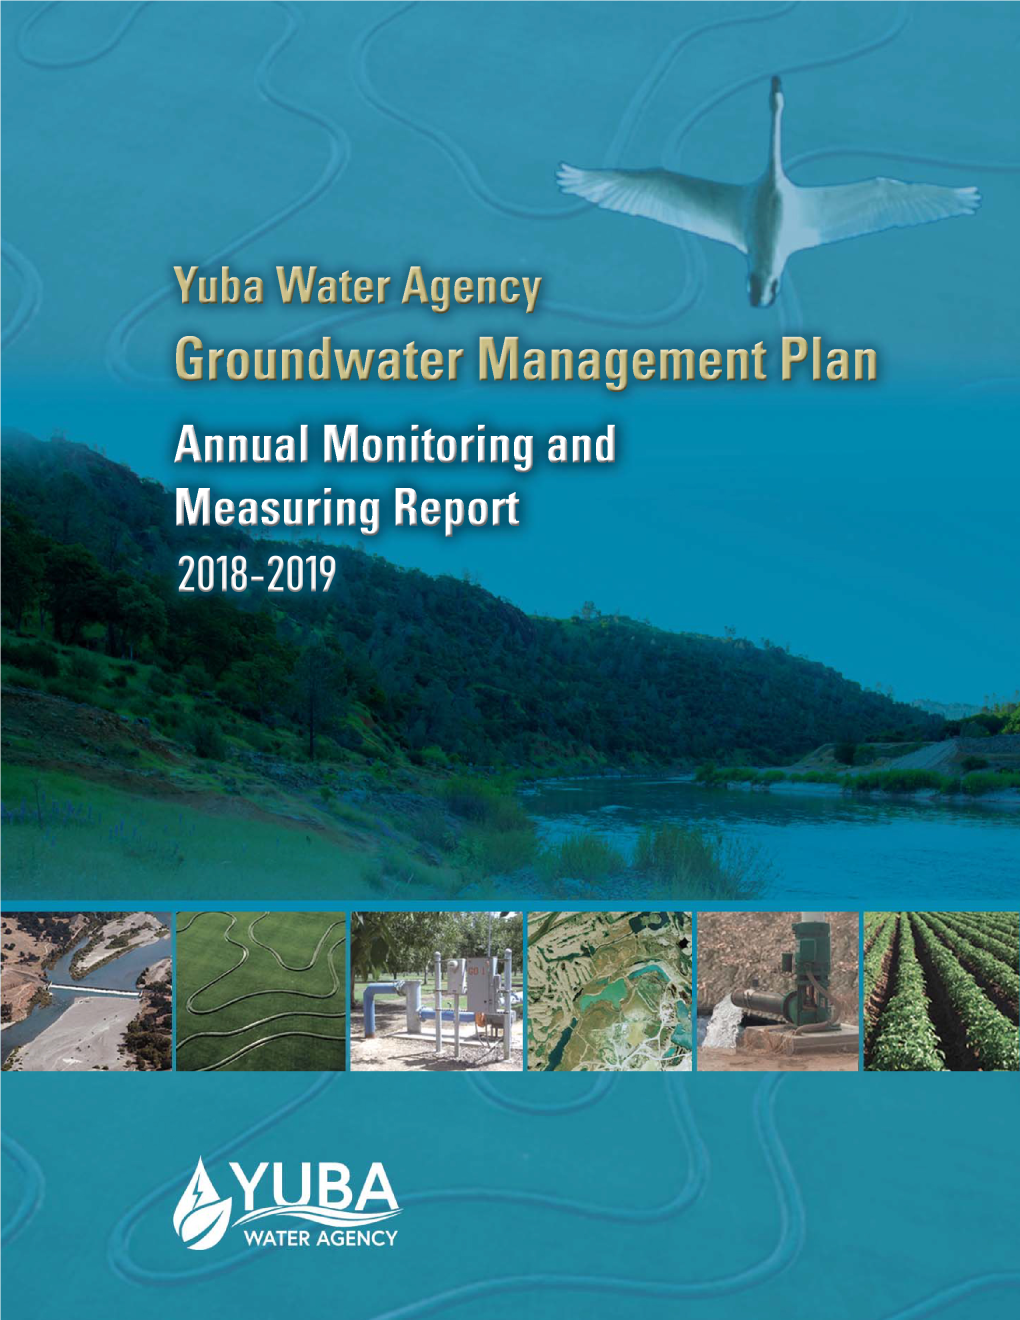 2018-19 Annual Monitoring and Measuring Report (PDF)